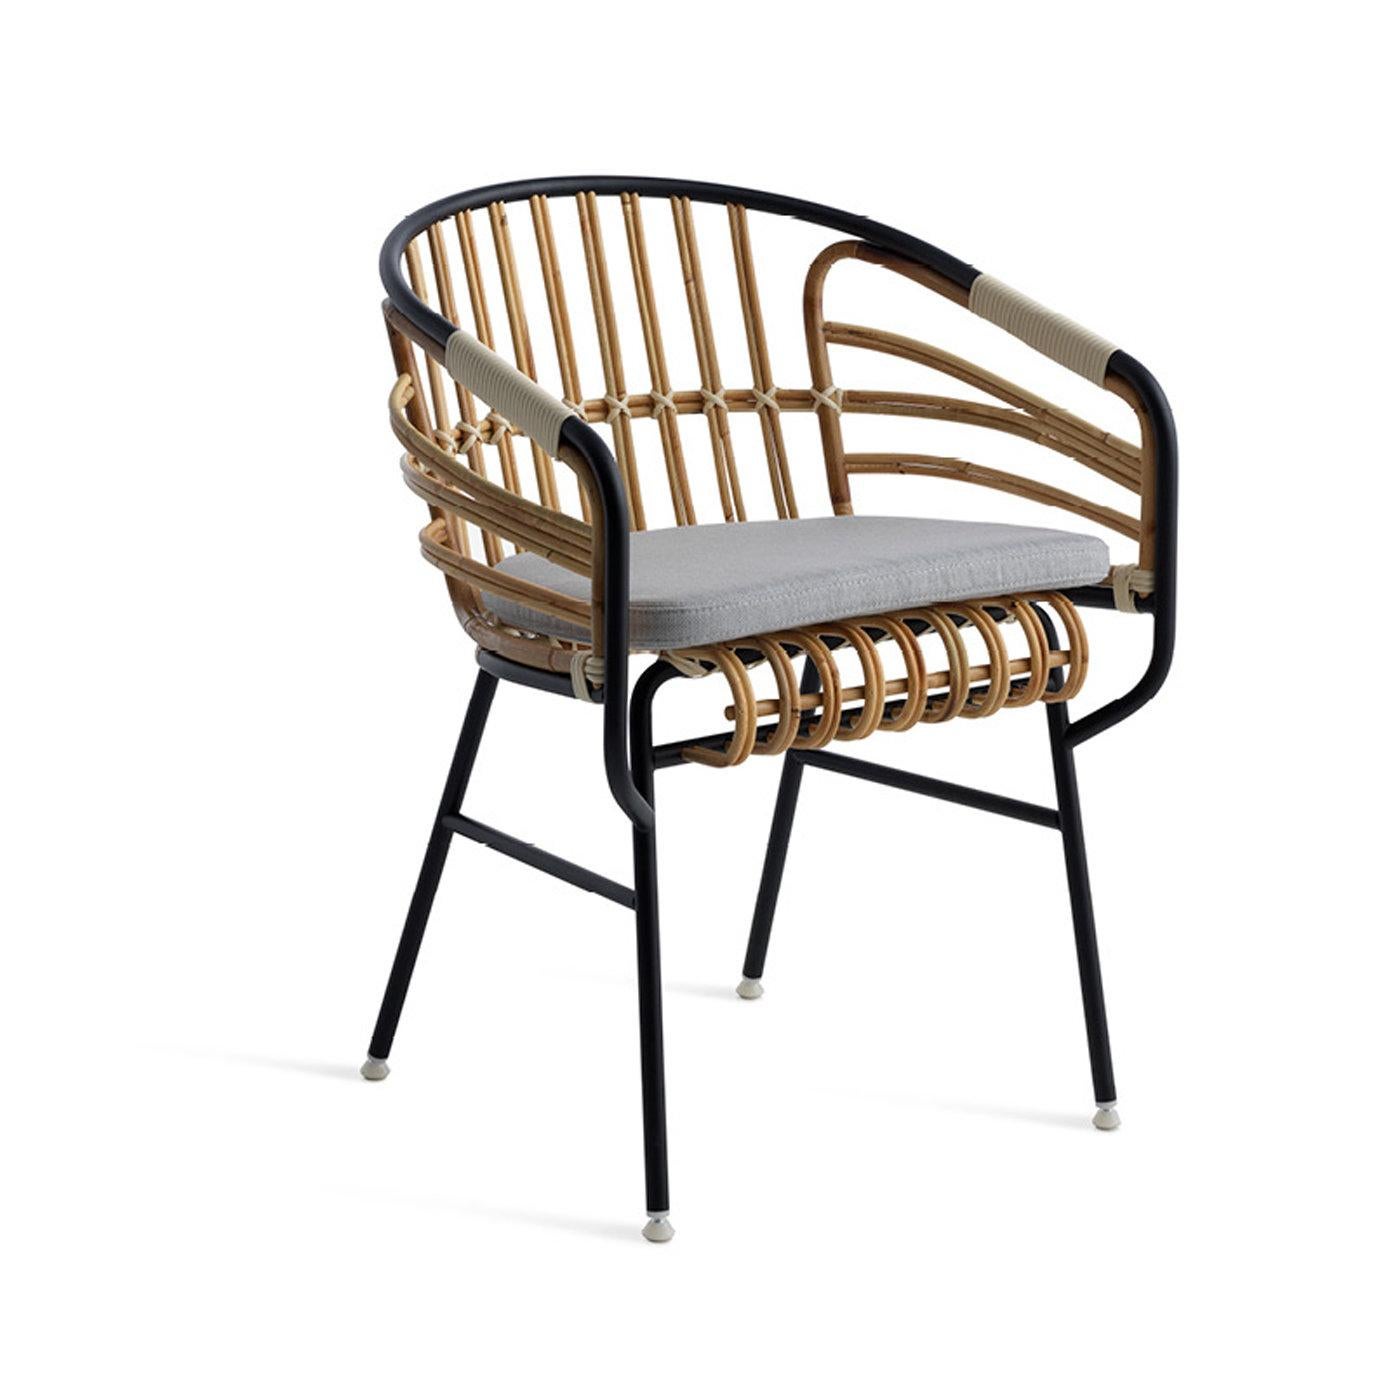 Balancing technology and craftsmanship, this splendid chair is part of a project by Lucidi Pevere to bring together in a contemporary style two time-honoured Italian traditions: the metal industry and the rattan and wicker manufacturers. Raphia is a